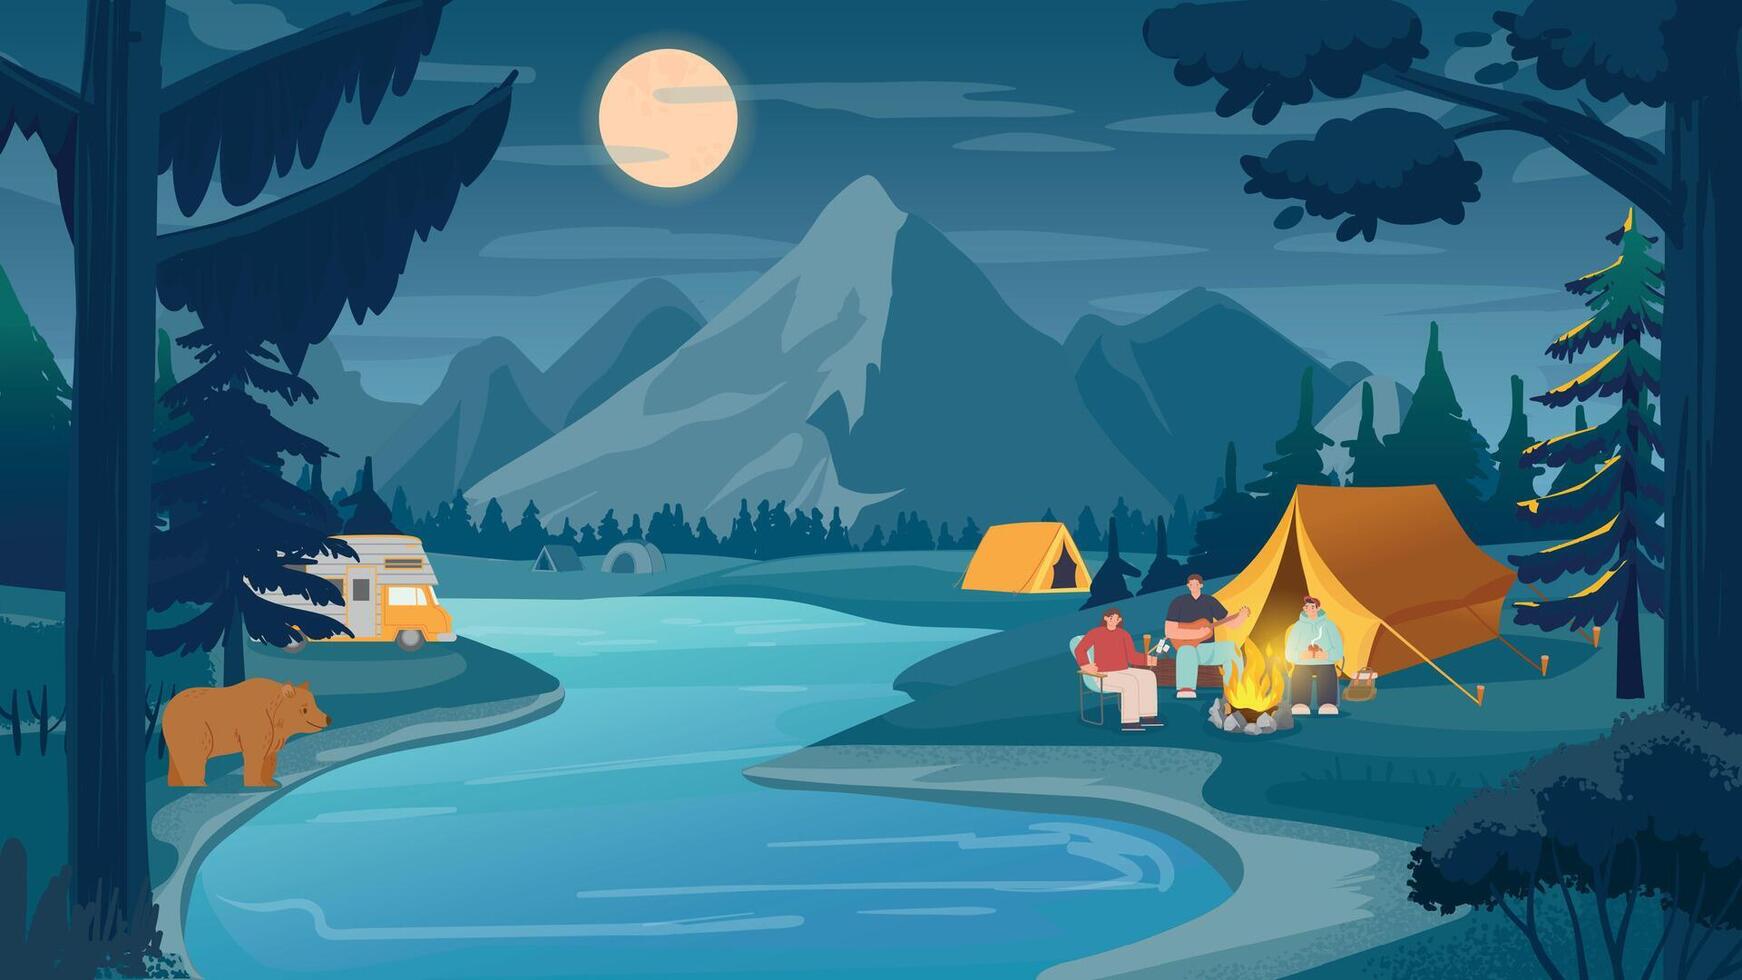 Mountain night camping, nature landscape near river vector